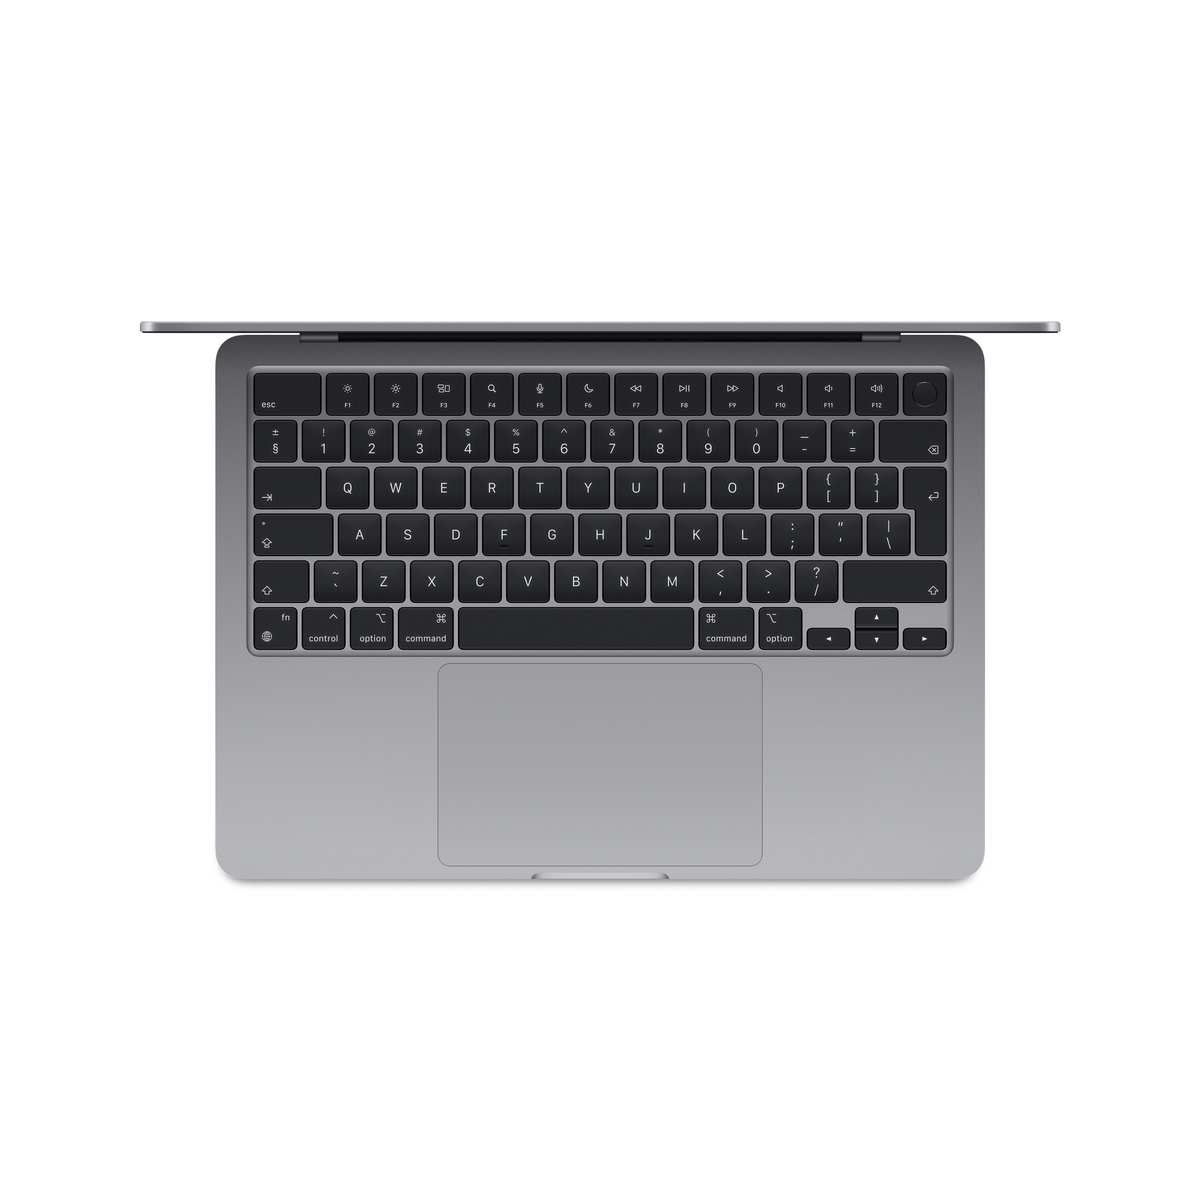 Apple MacBook Air, 13 inches, 8 GB RAM, 256 GB SSD, Apple M3 chip with 8-core CPU and 8-core GPU, macOS, English, Space Grey